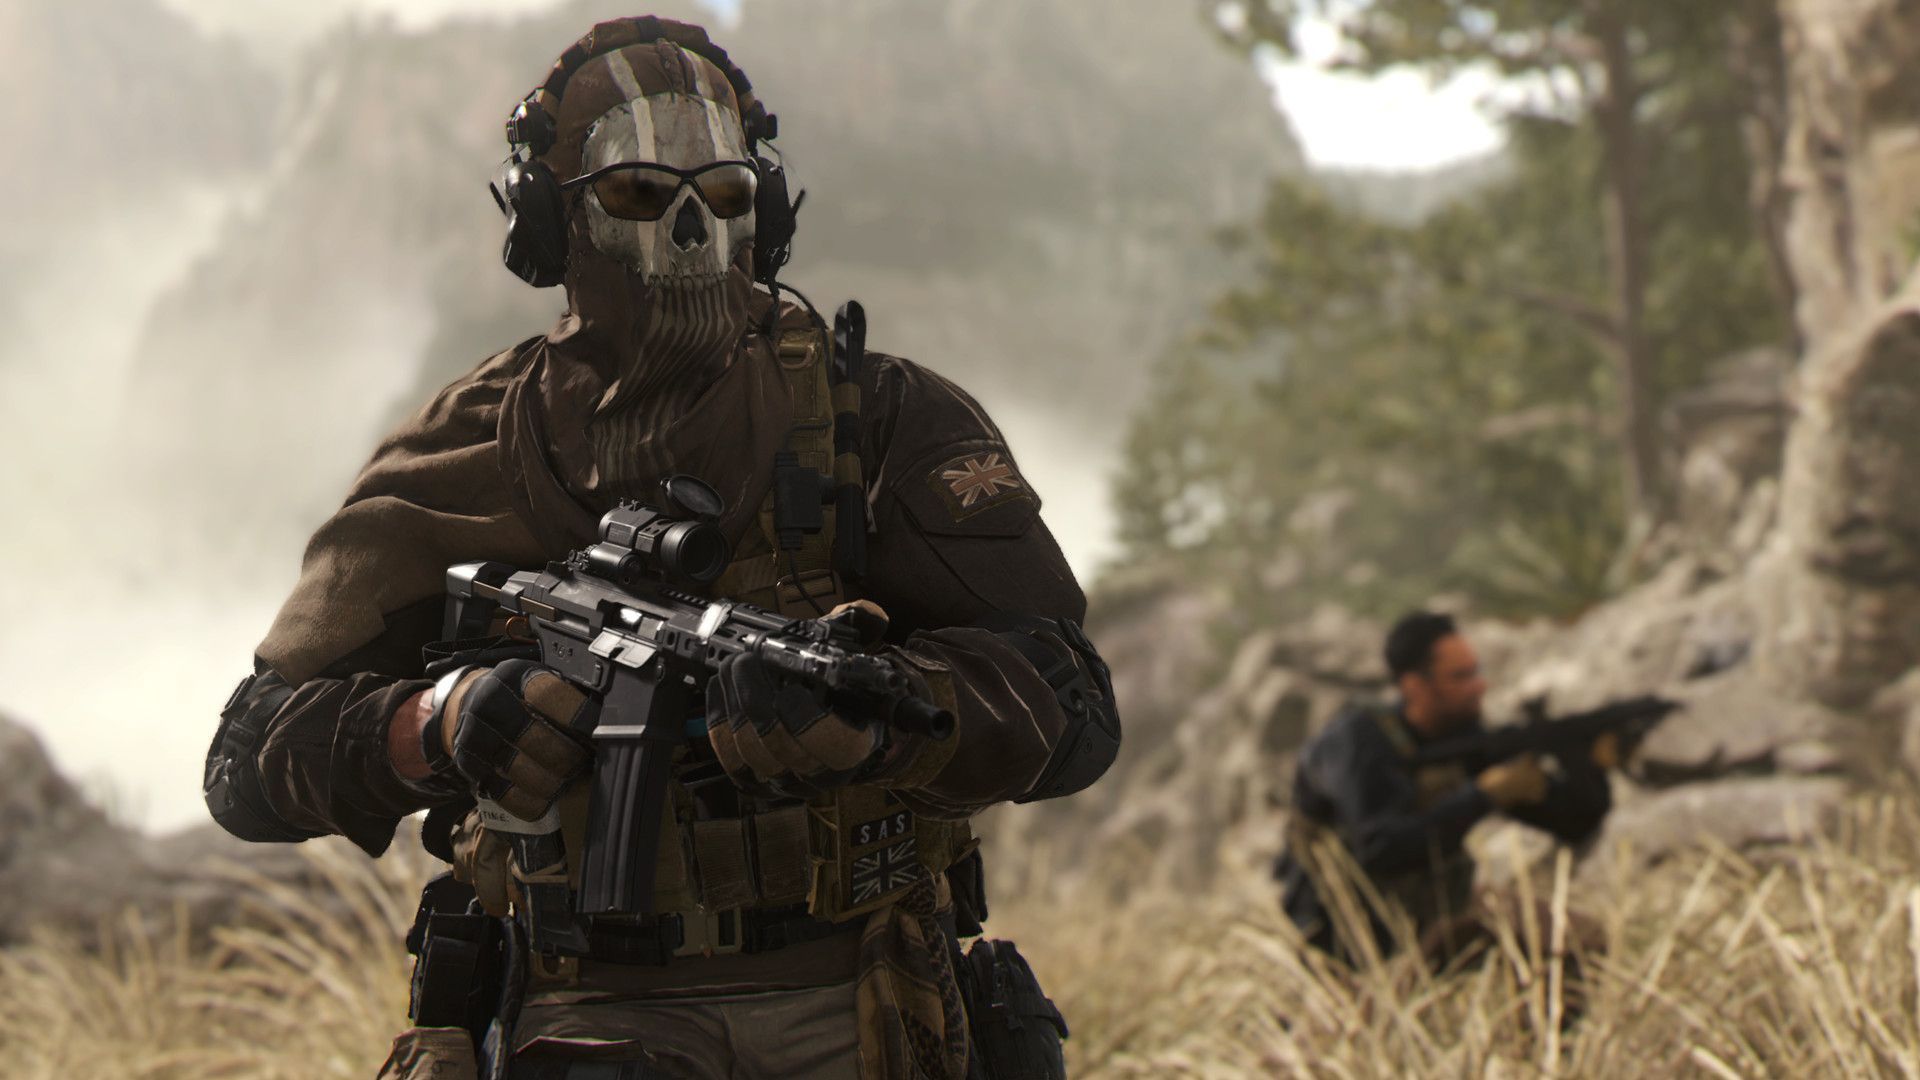 In this article, we are going to be covering the Modern Warfare 2 best loadout, the M4 build, so you can eliminate the enemies that cross your path.